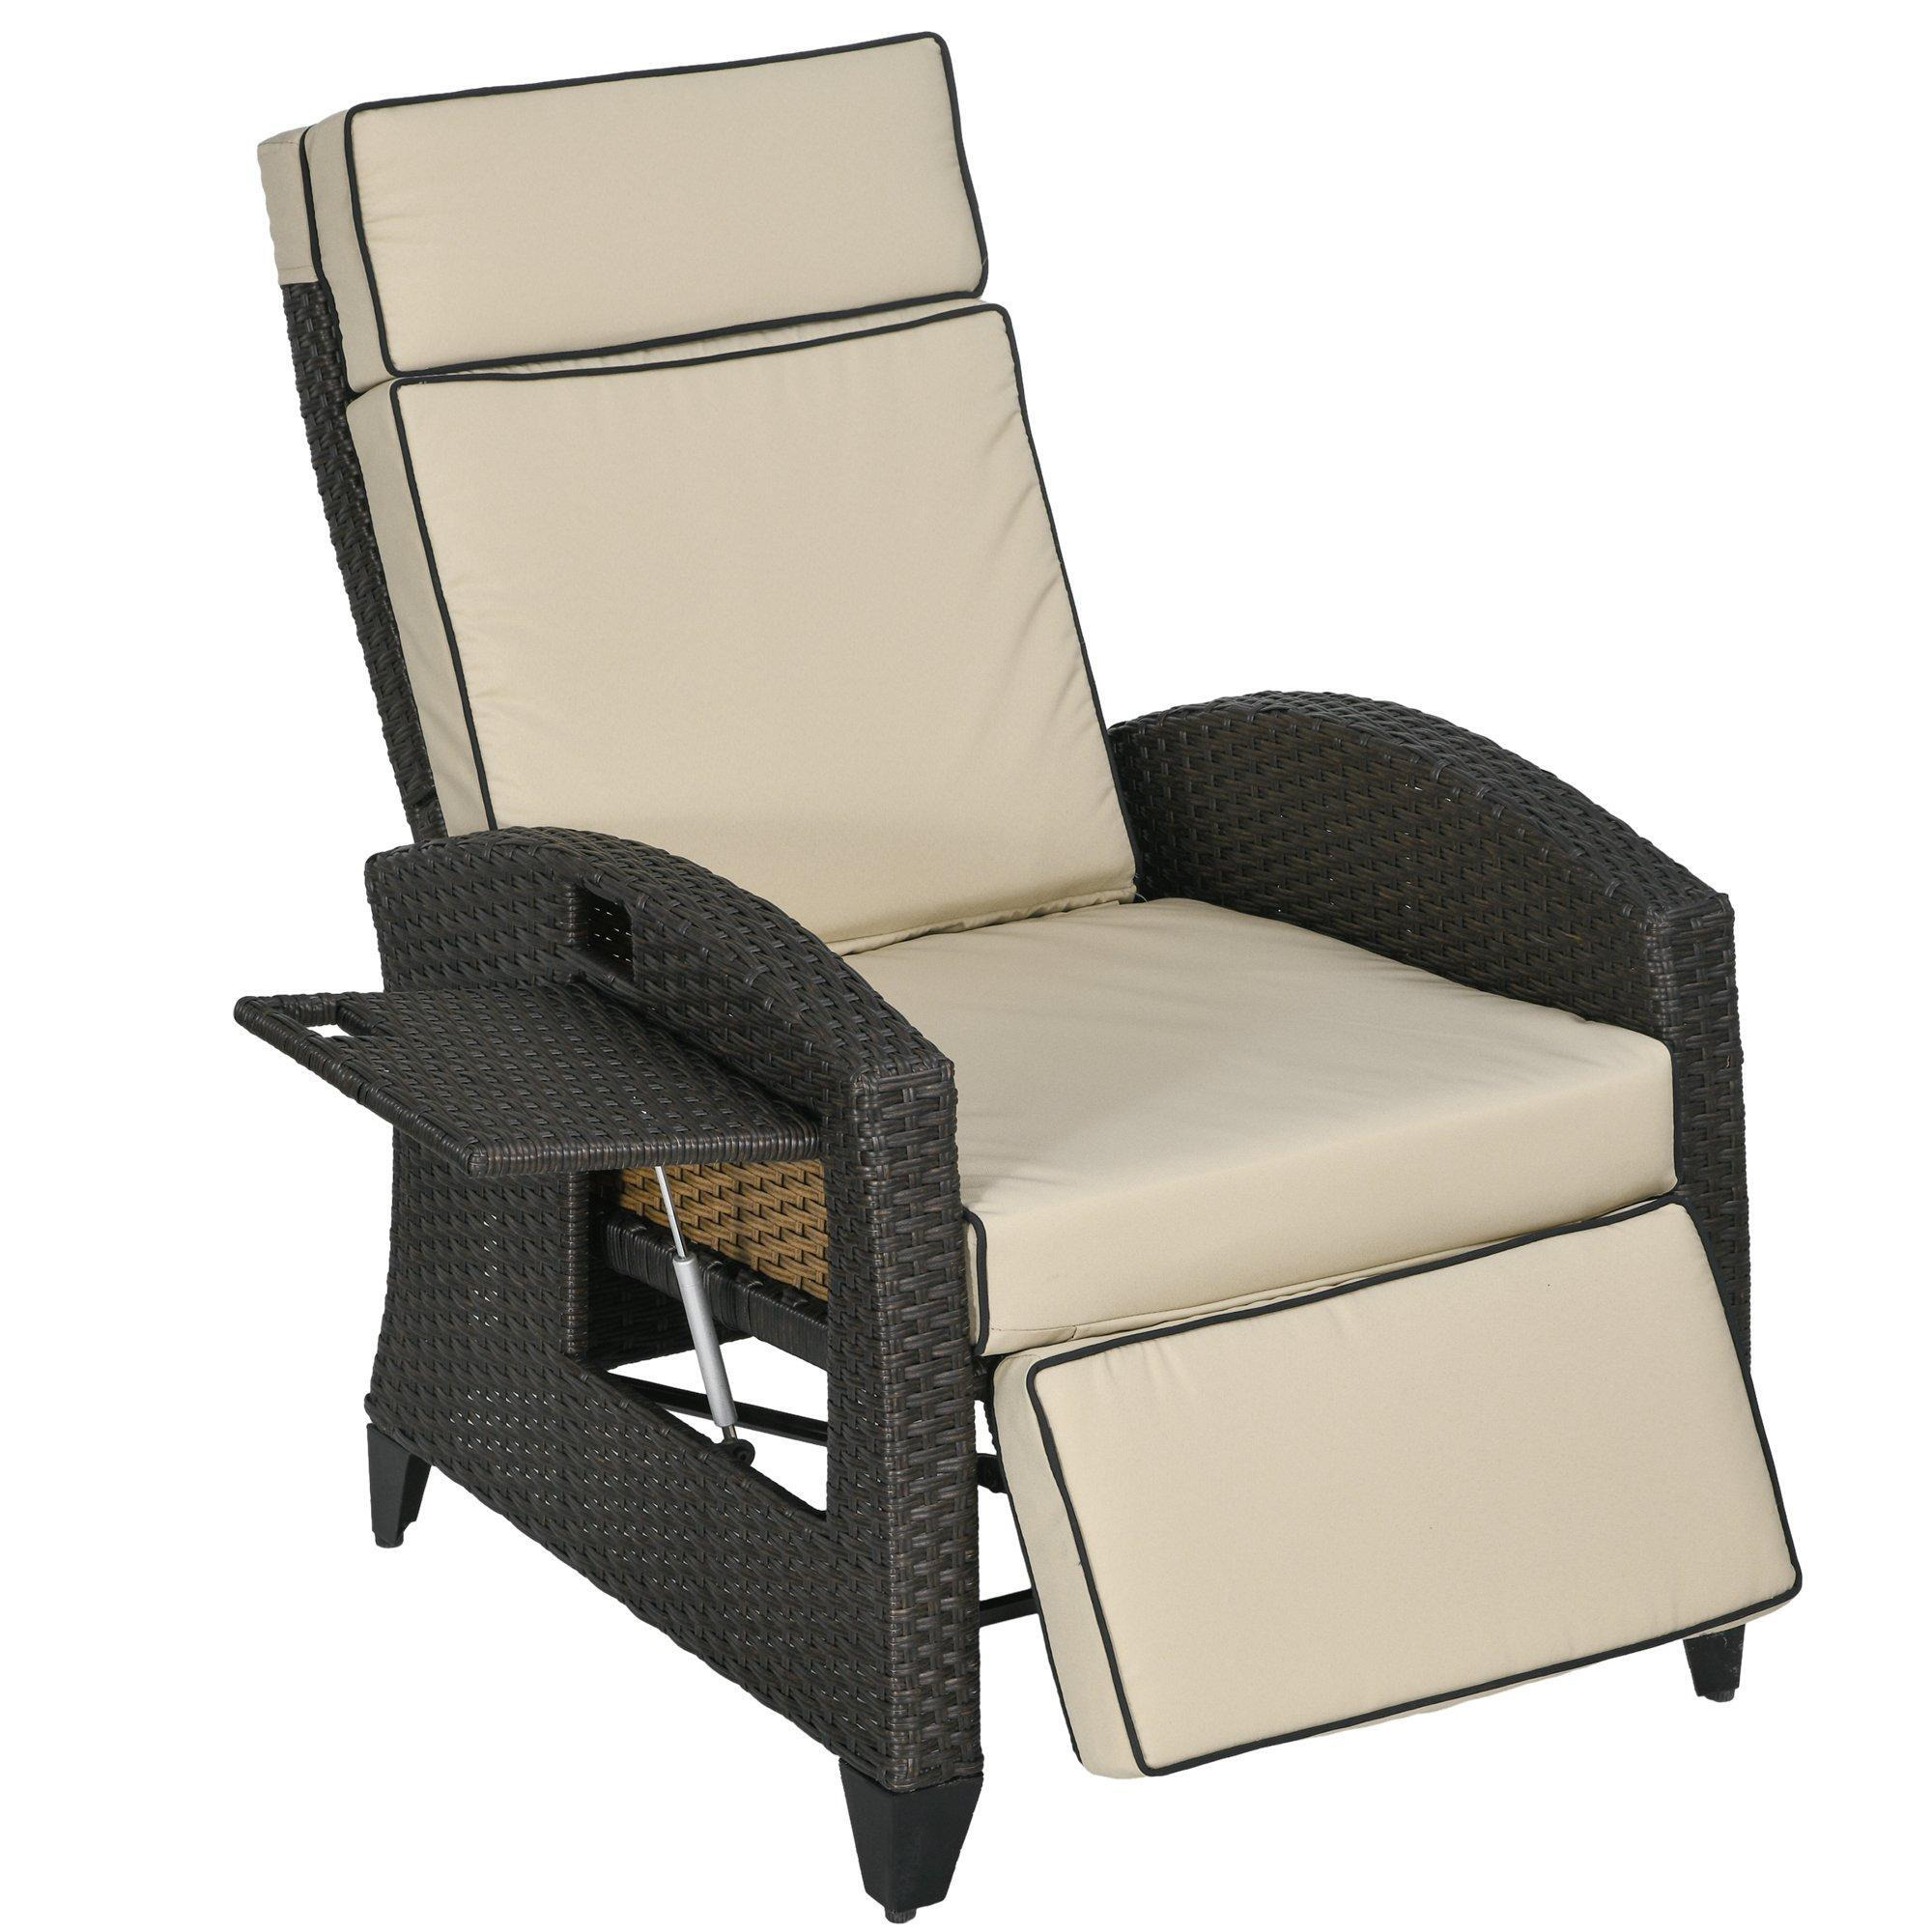 Outdoor Recliner Chair w/ Cushion, PE Rattan Reclining Lounge Chair - image 1